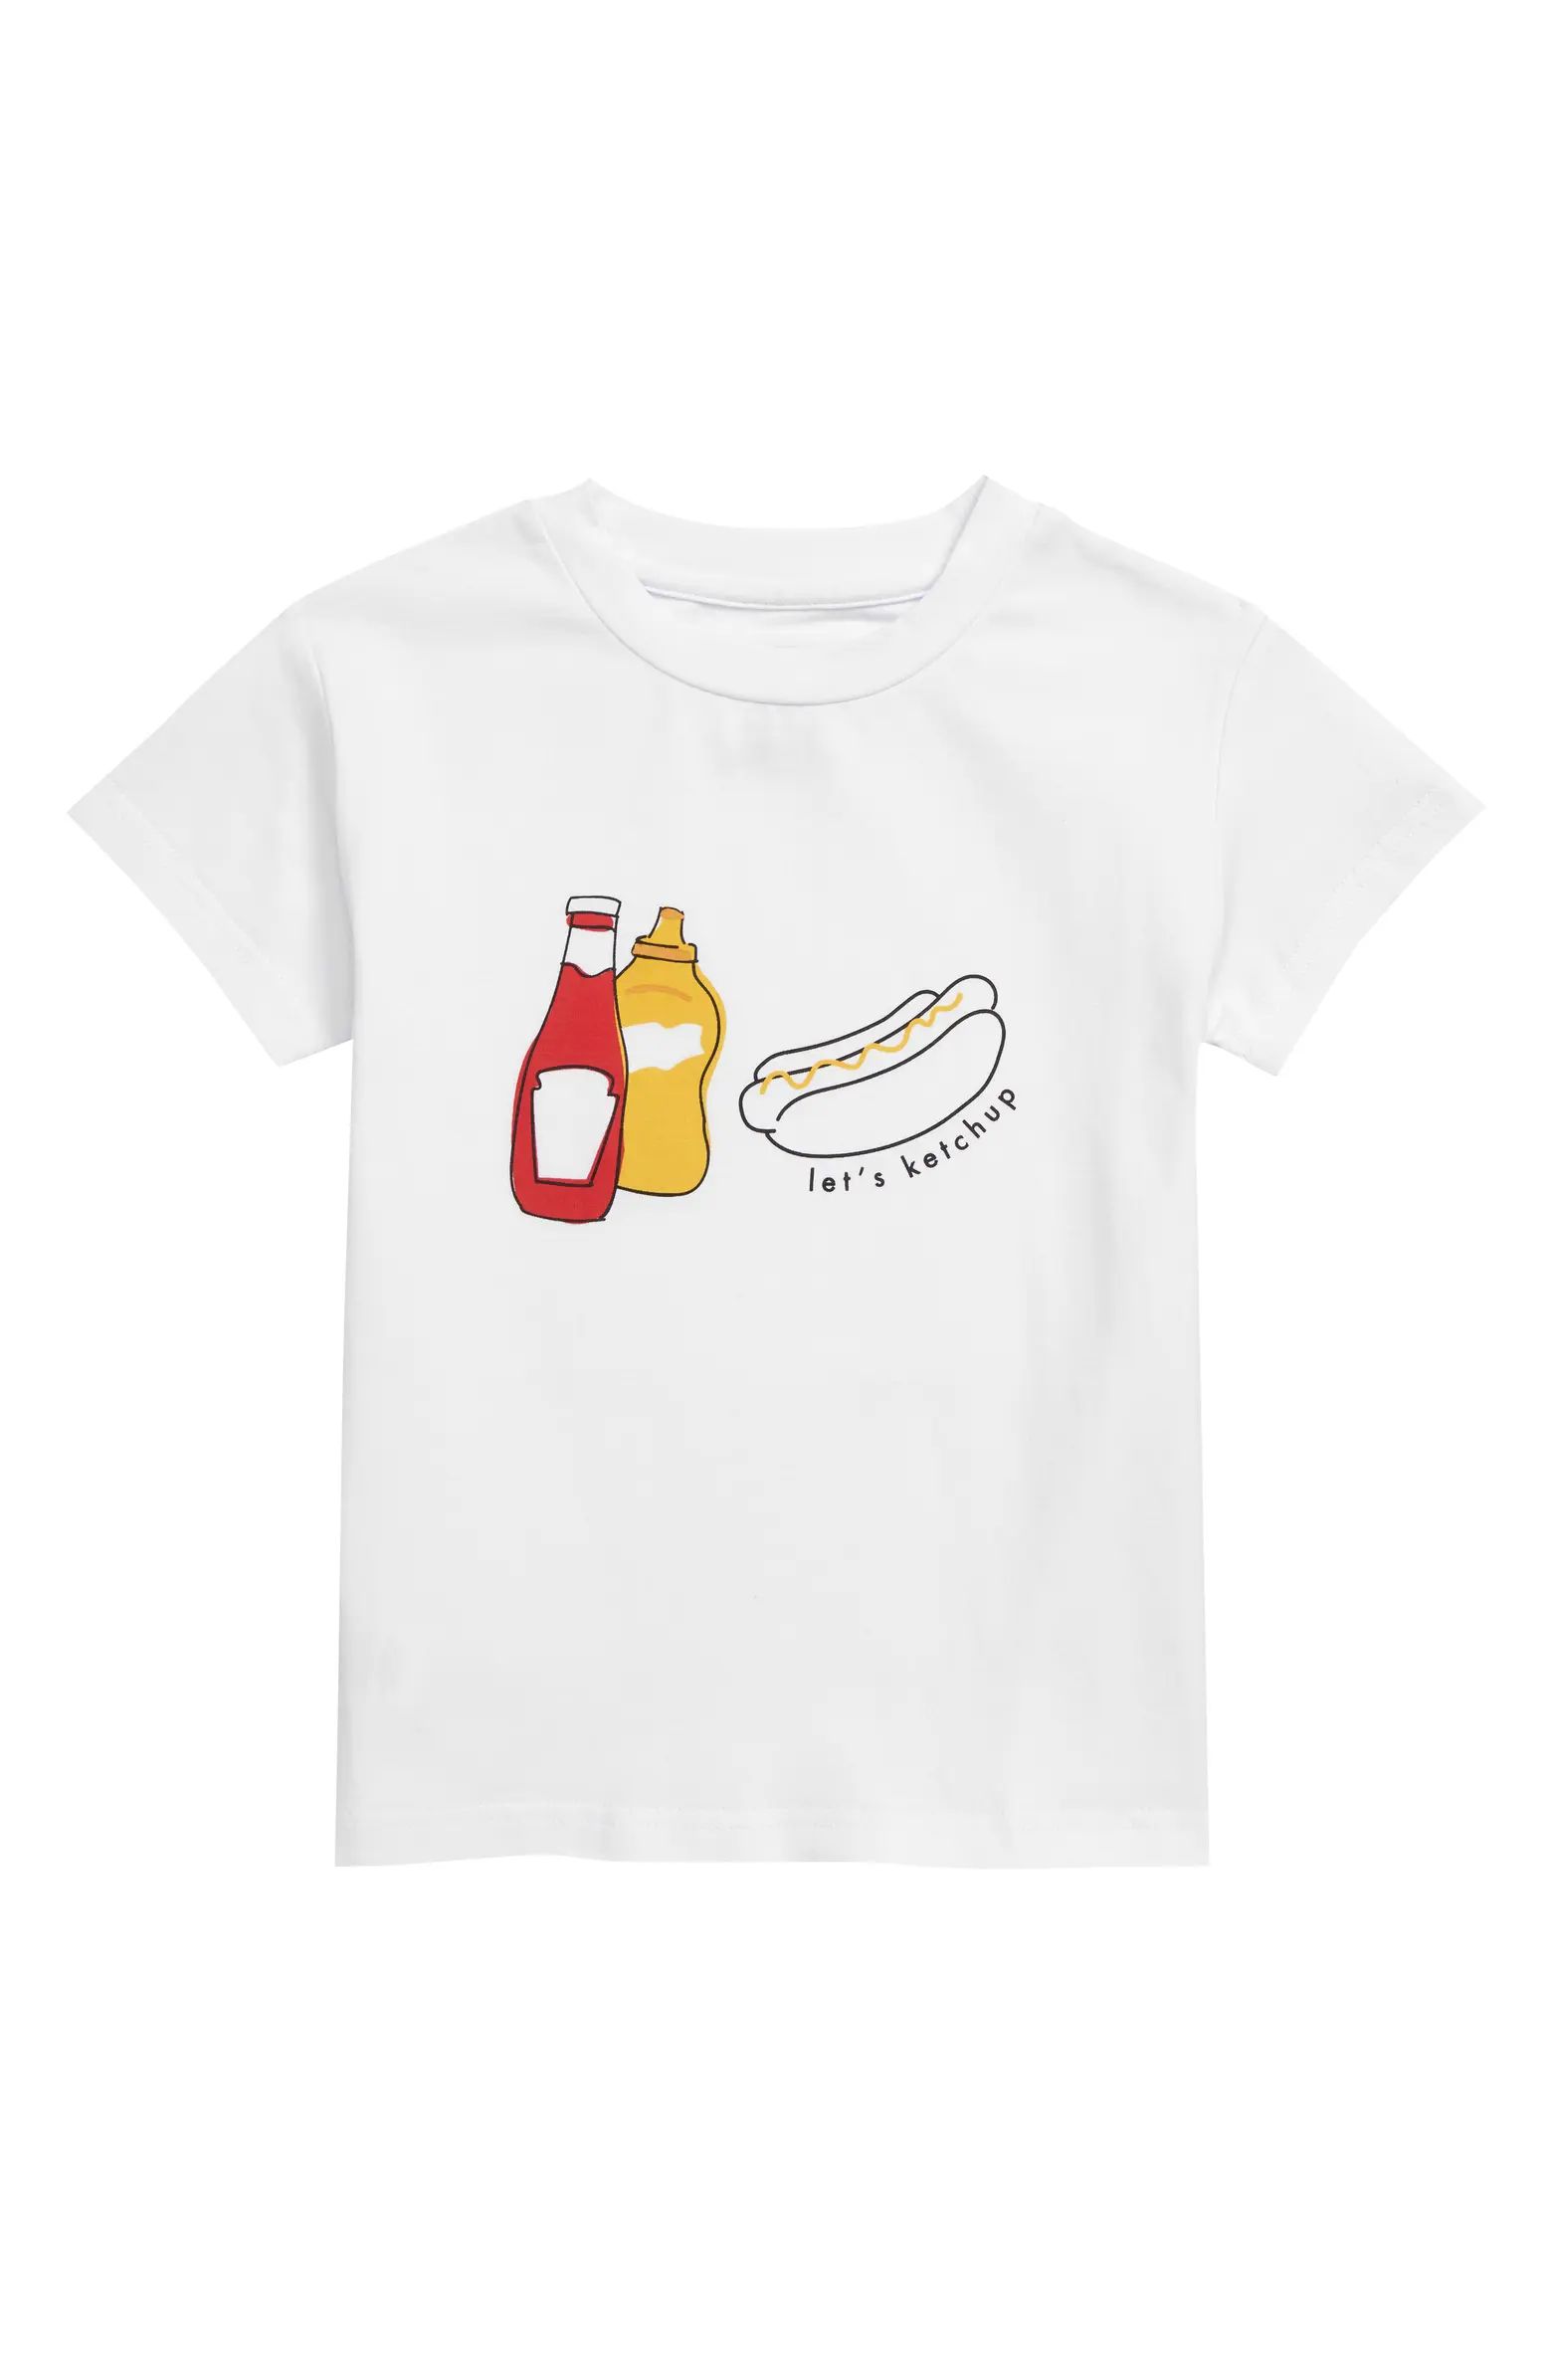 Let's Ketchup Graphic Tee | Nordstrom